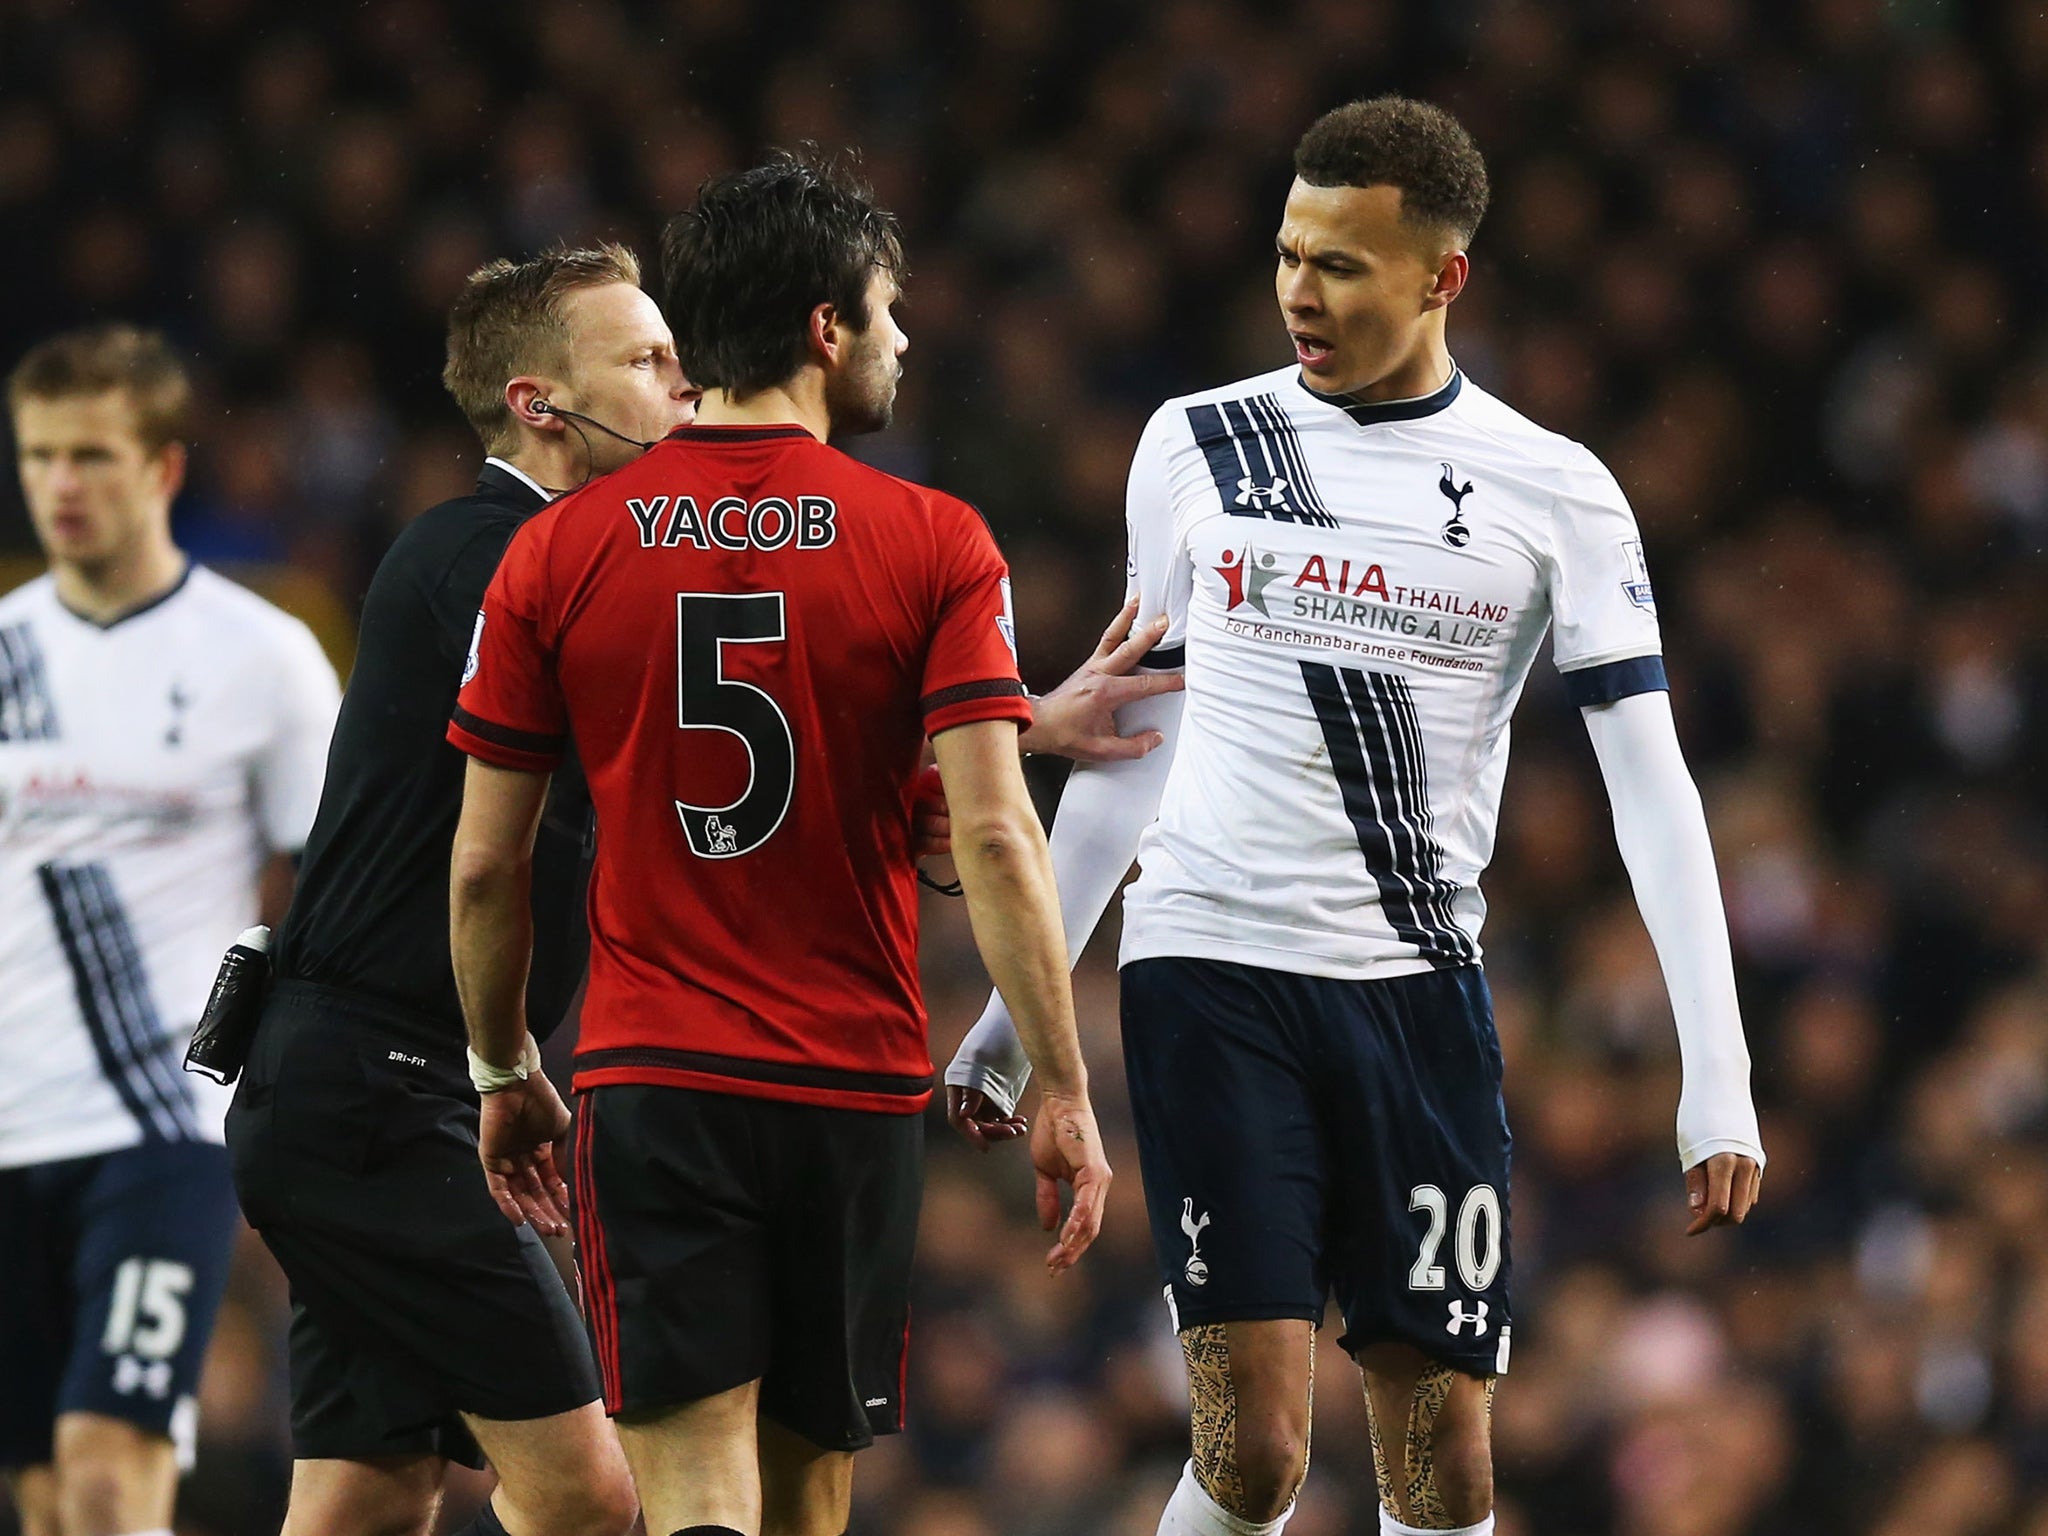 &#13;
Alli has been given a three-match ban &#13;